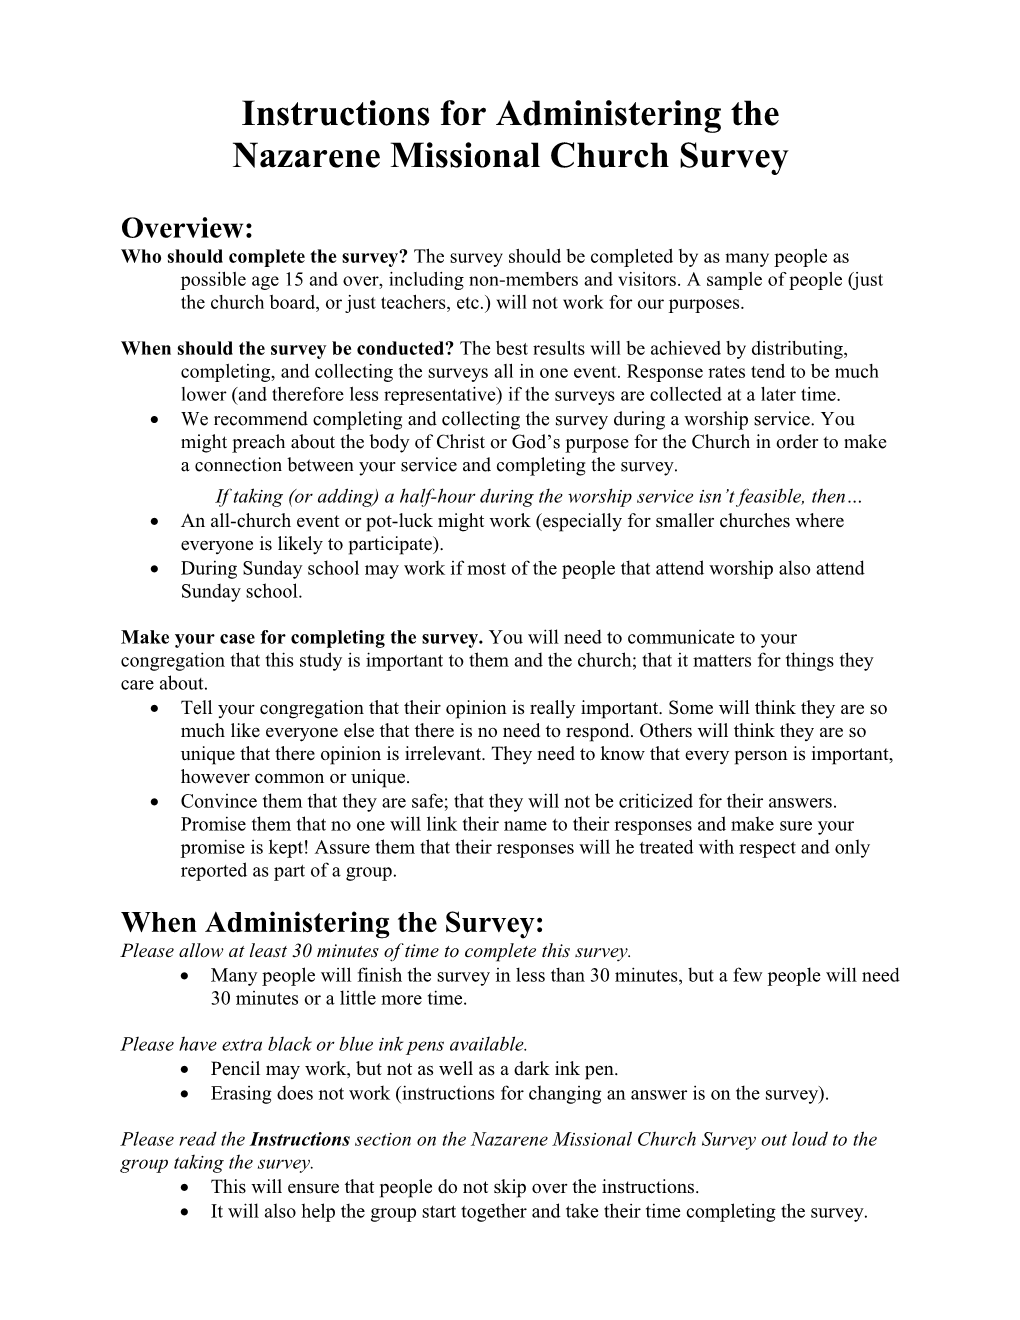 Instructions for Field Testing the Nazarene Missional Church Survey